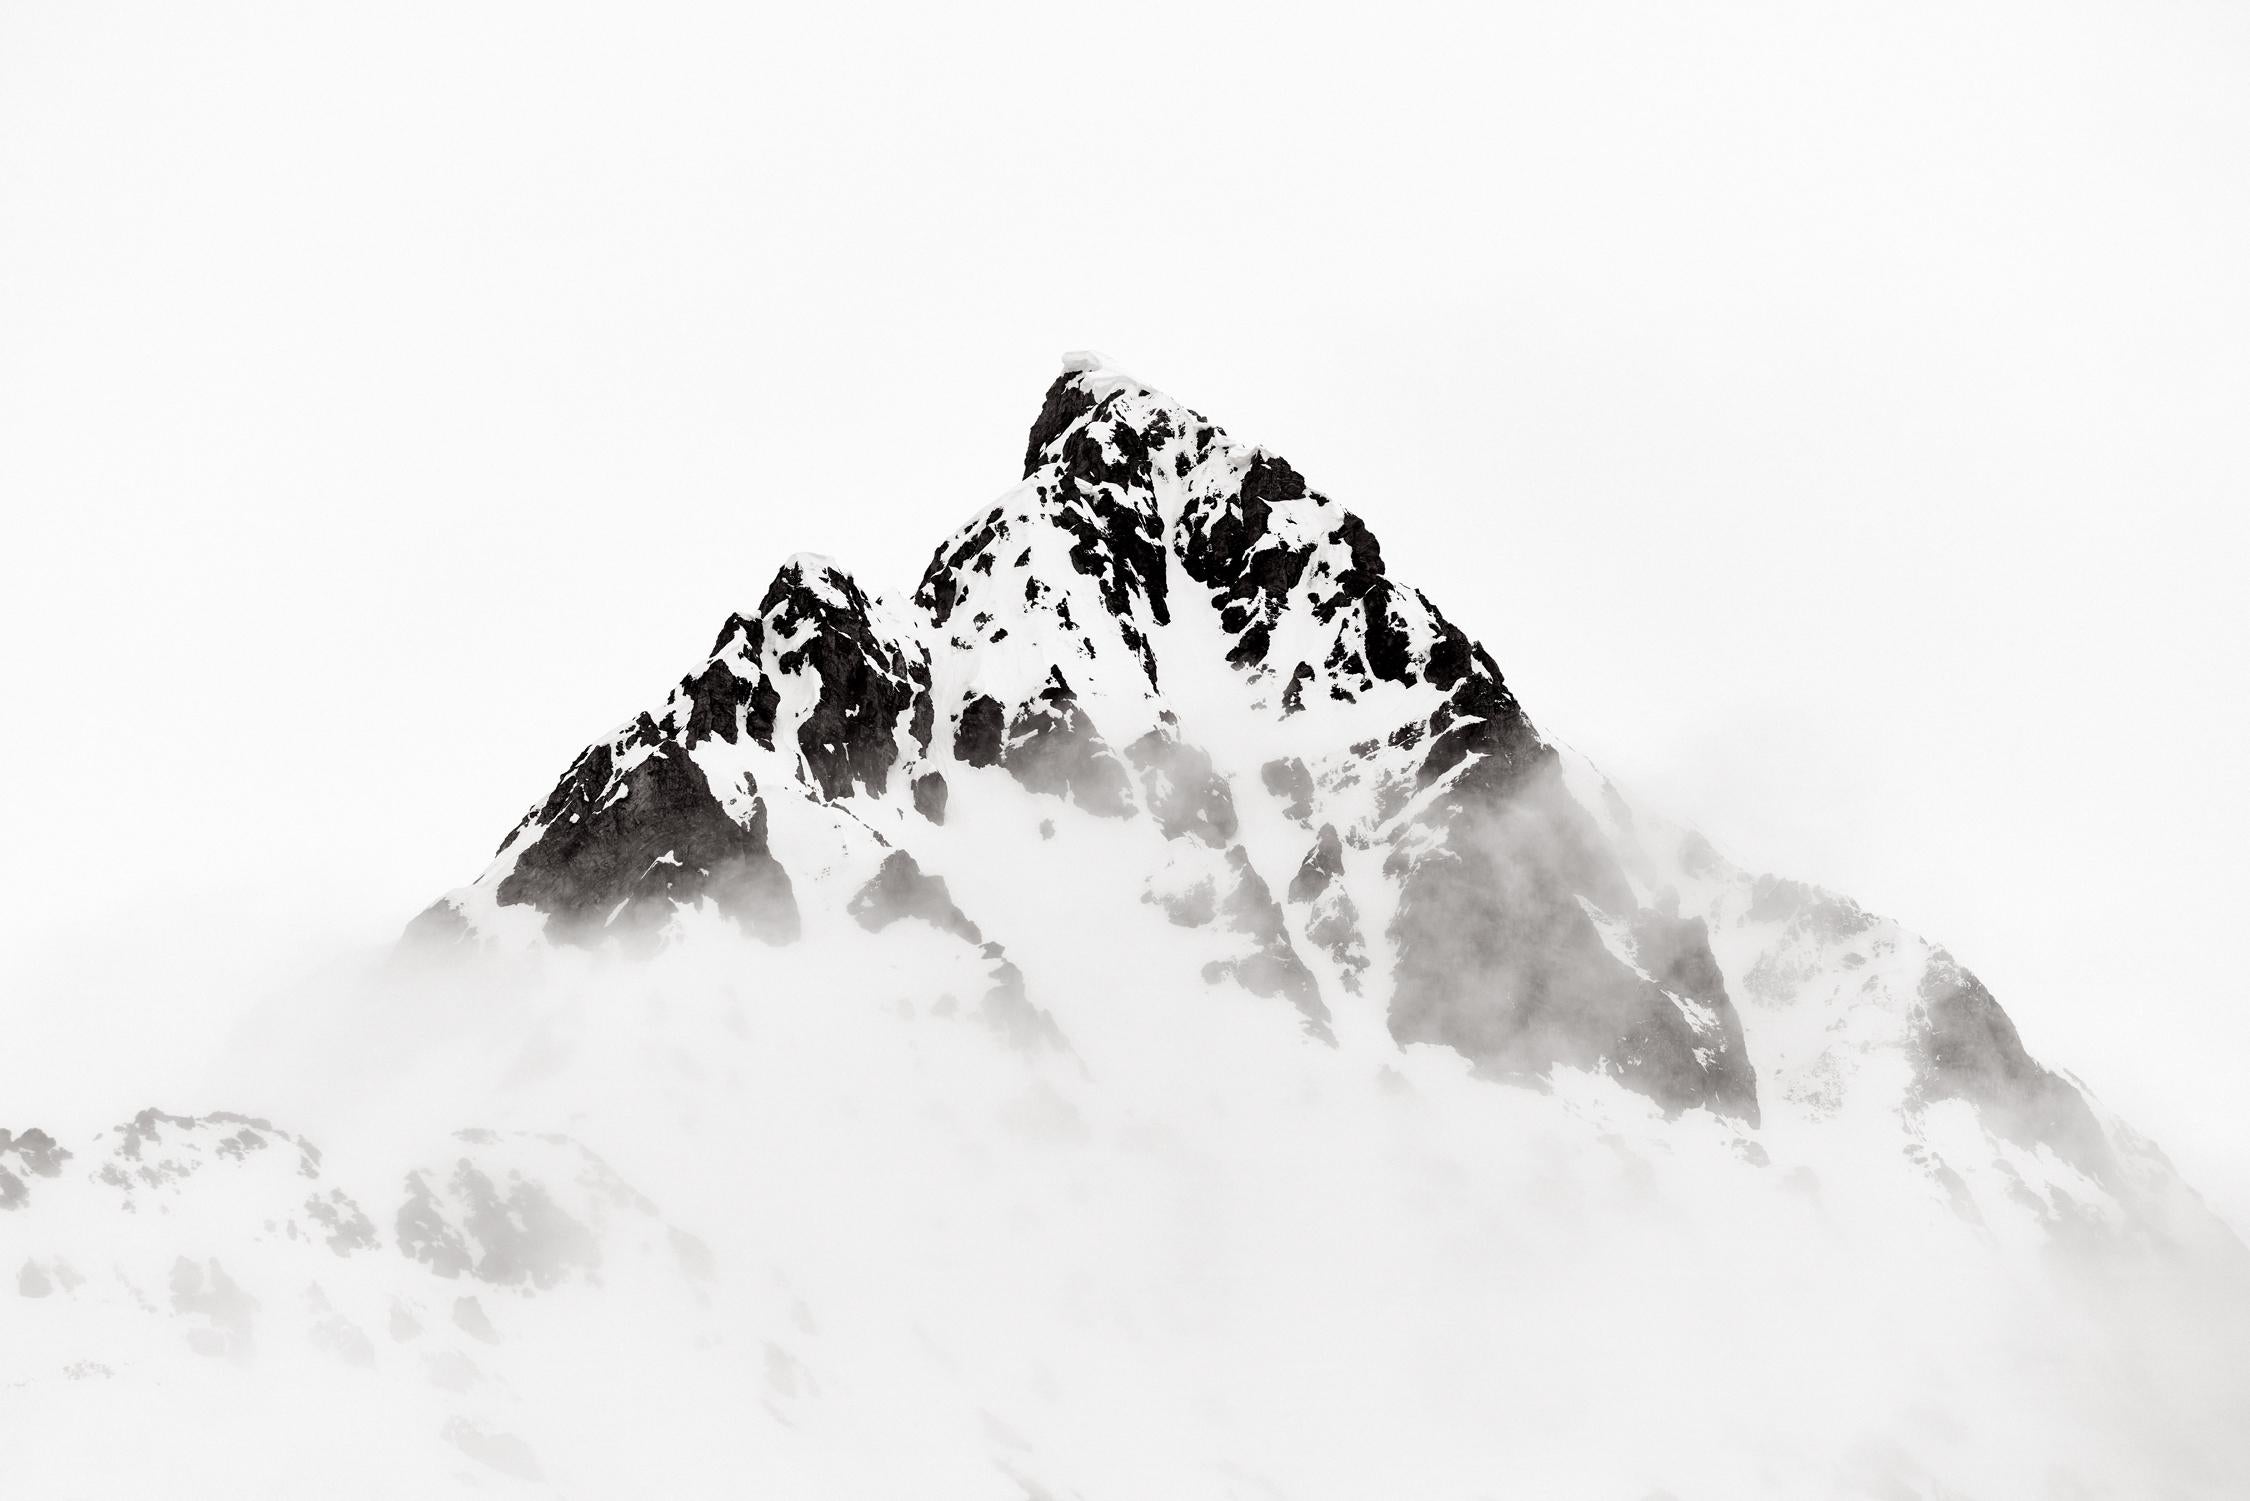 Drew Doggett Black and White Photograph - Minimal, Abstract Landscape of the Arctic with a Snowy Peak 